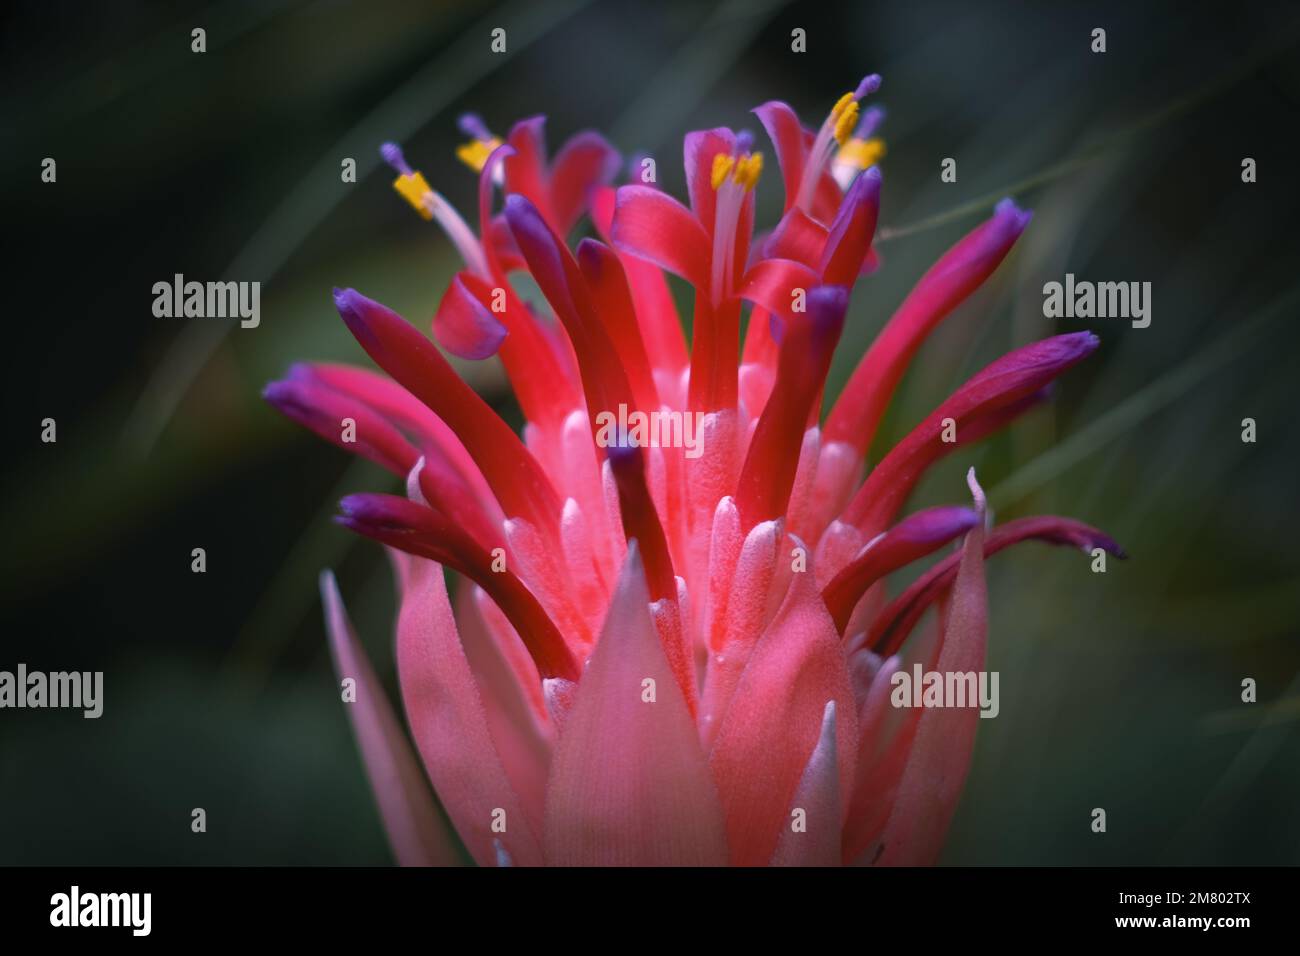 A closeup of a red Queen's-tears (Billbergia nutans) against blurred background Stock Photo